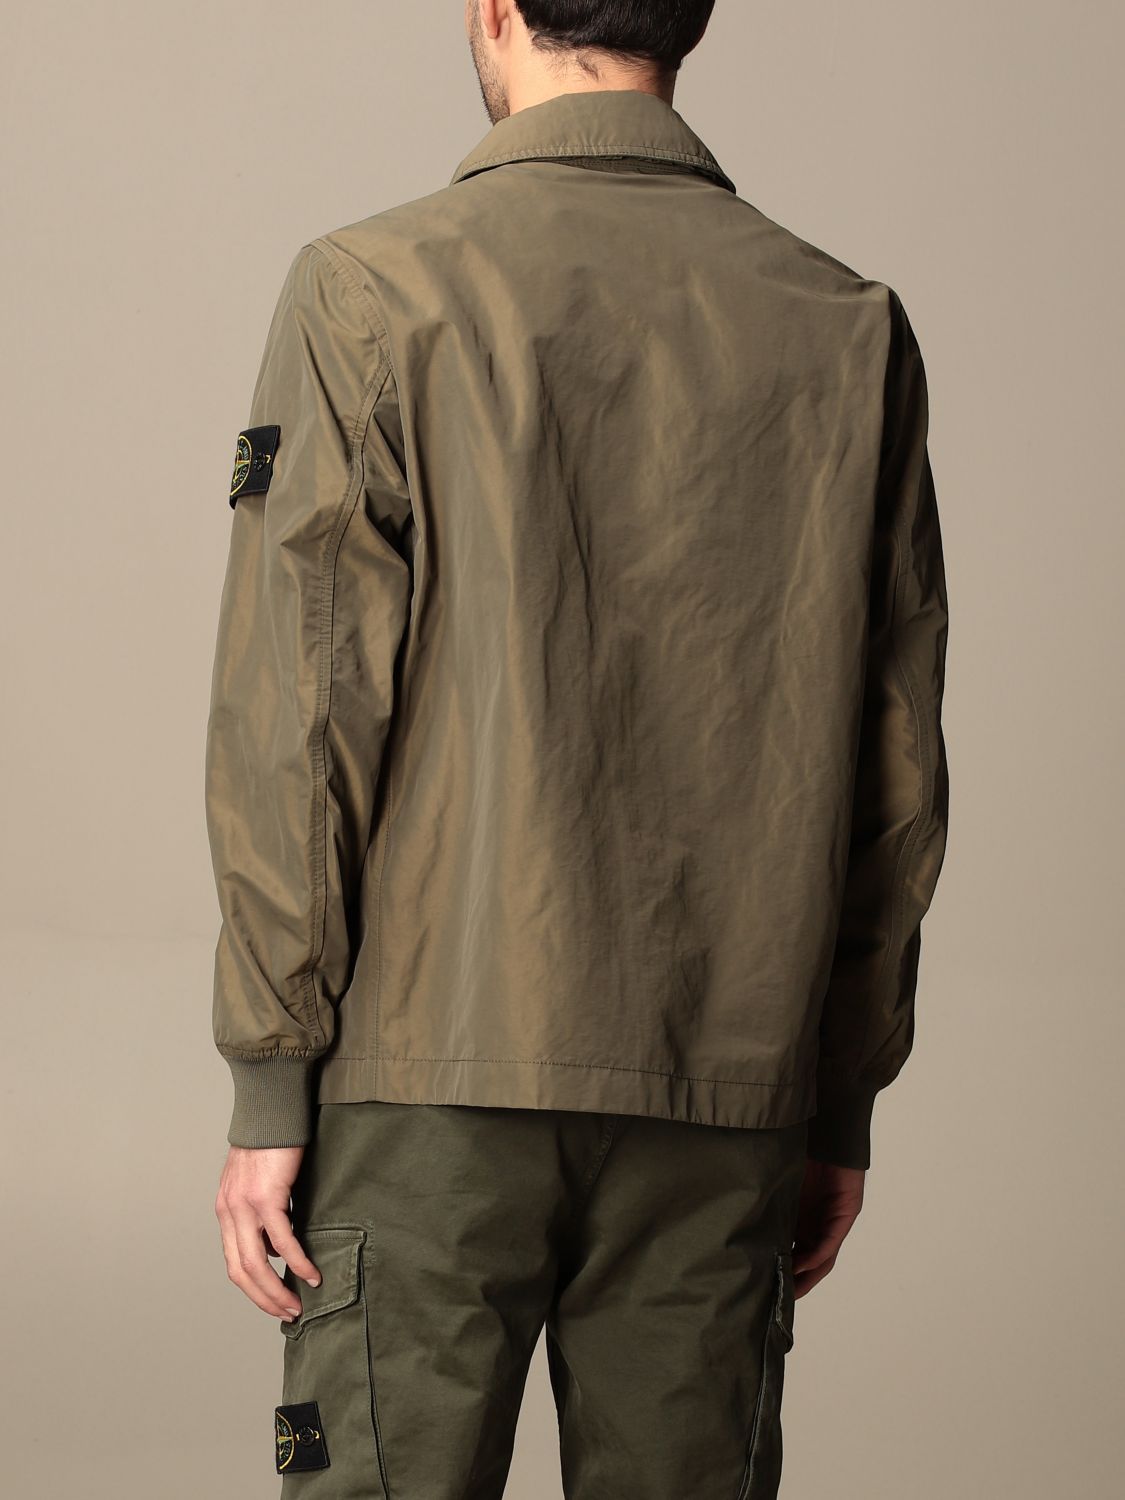 Stone Island Outlet: jacket in opaque nylon polyester rep | Jacket